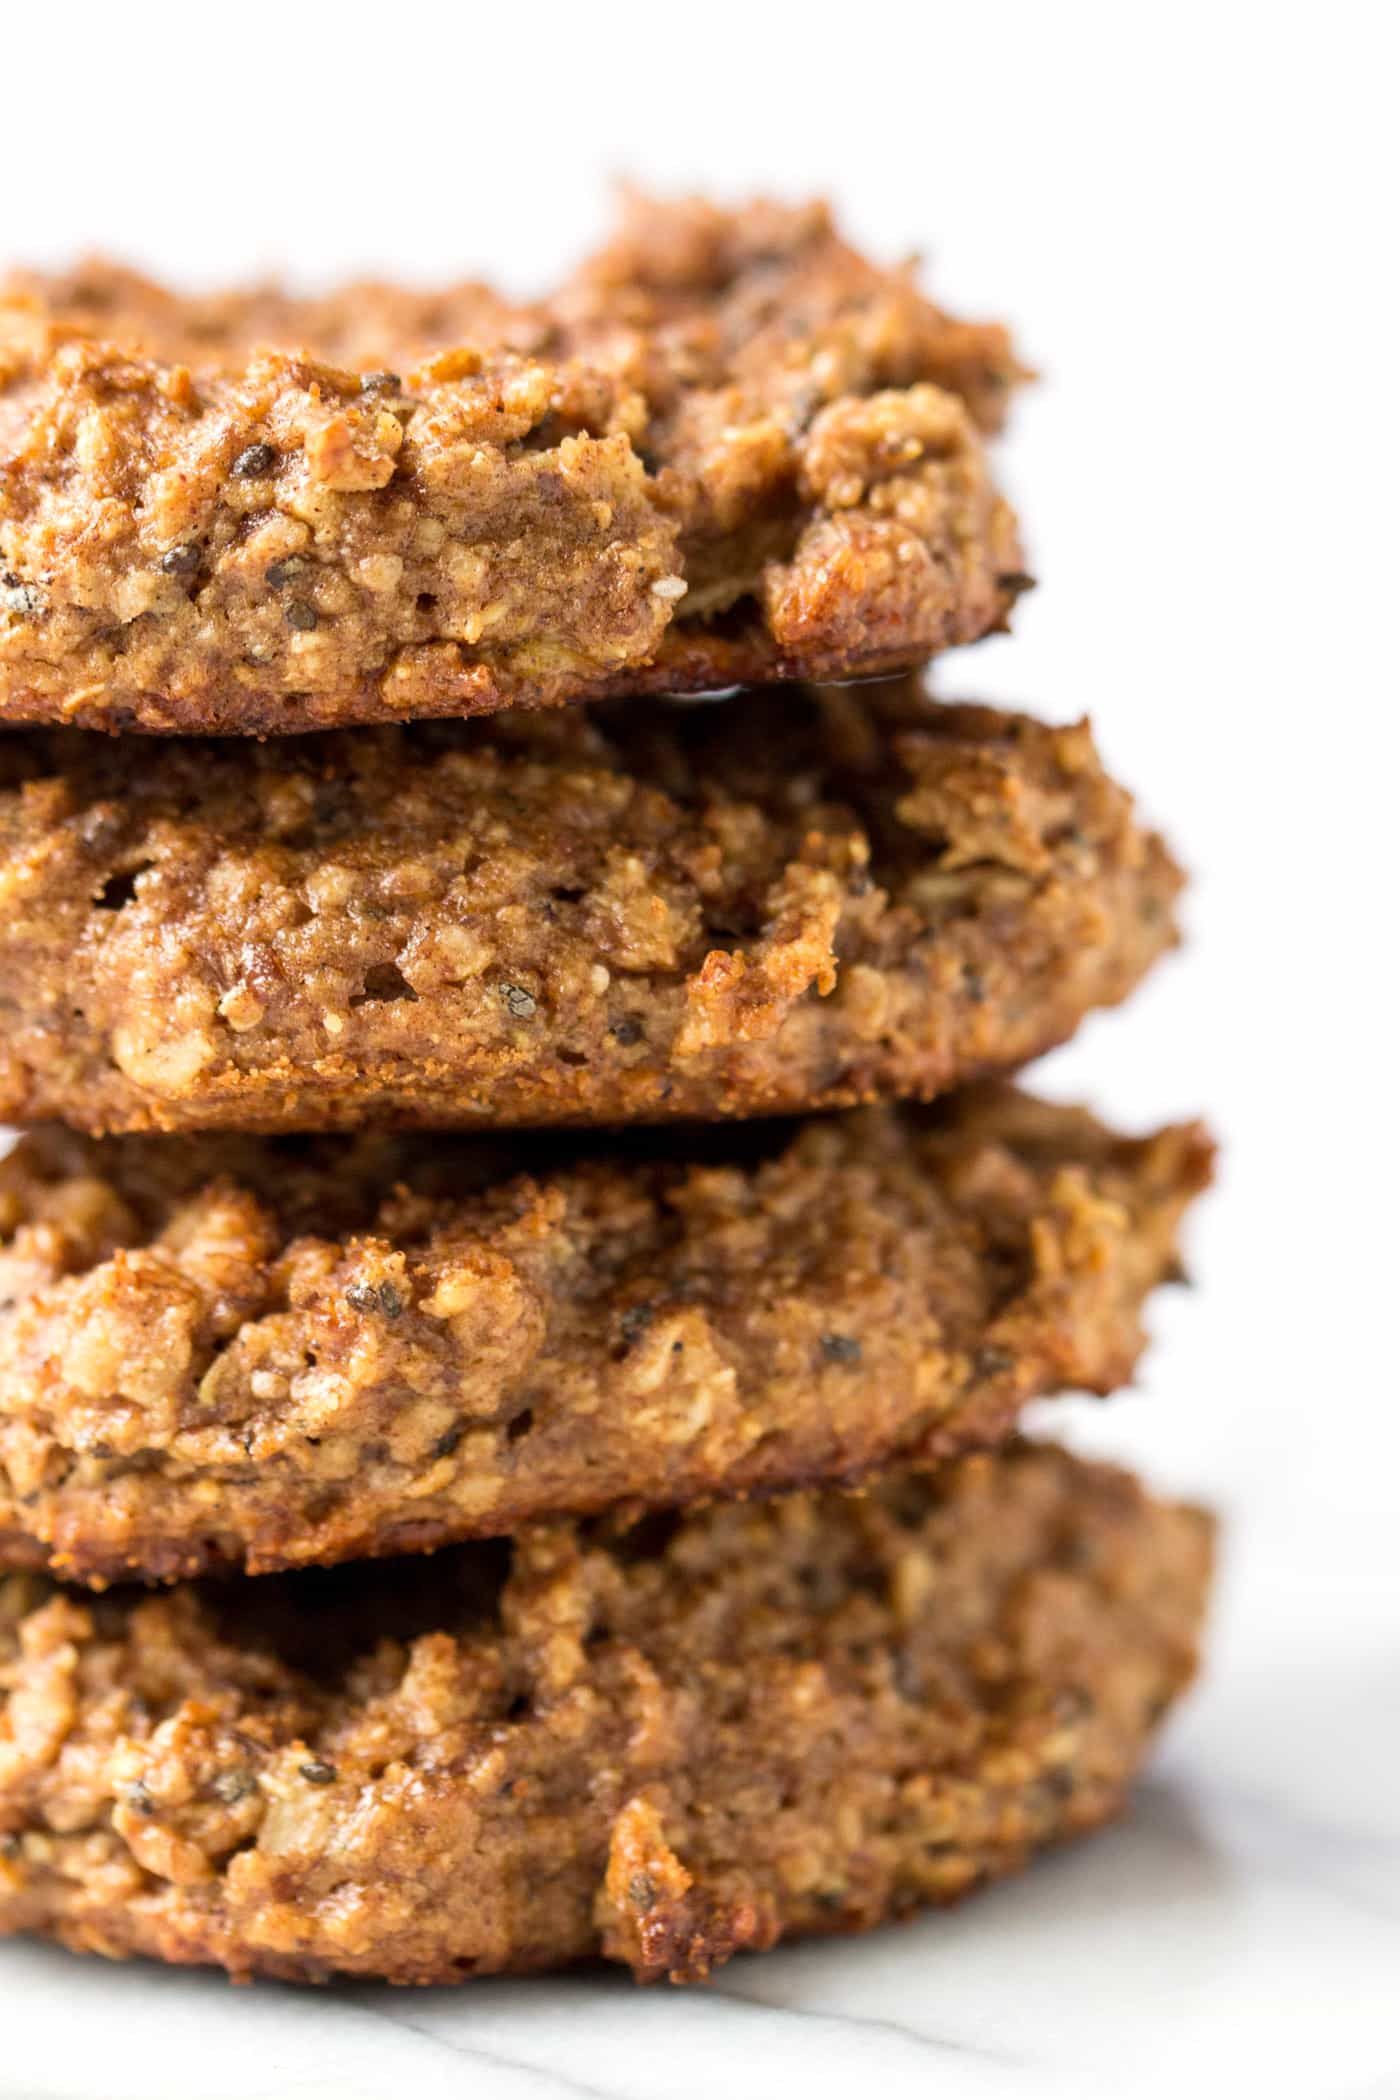 Wish you could have cookies for breakfast every day? YOU CAN! These Snickerdoodle Quinoa Breakfast Cookies are super healthy and SO FLAVORFUL!